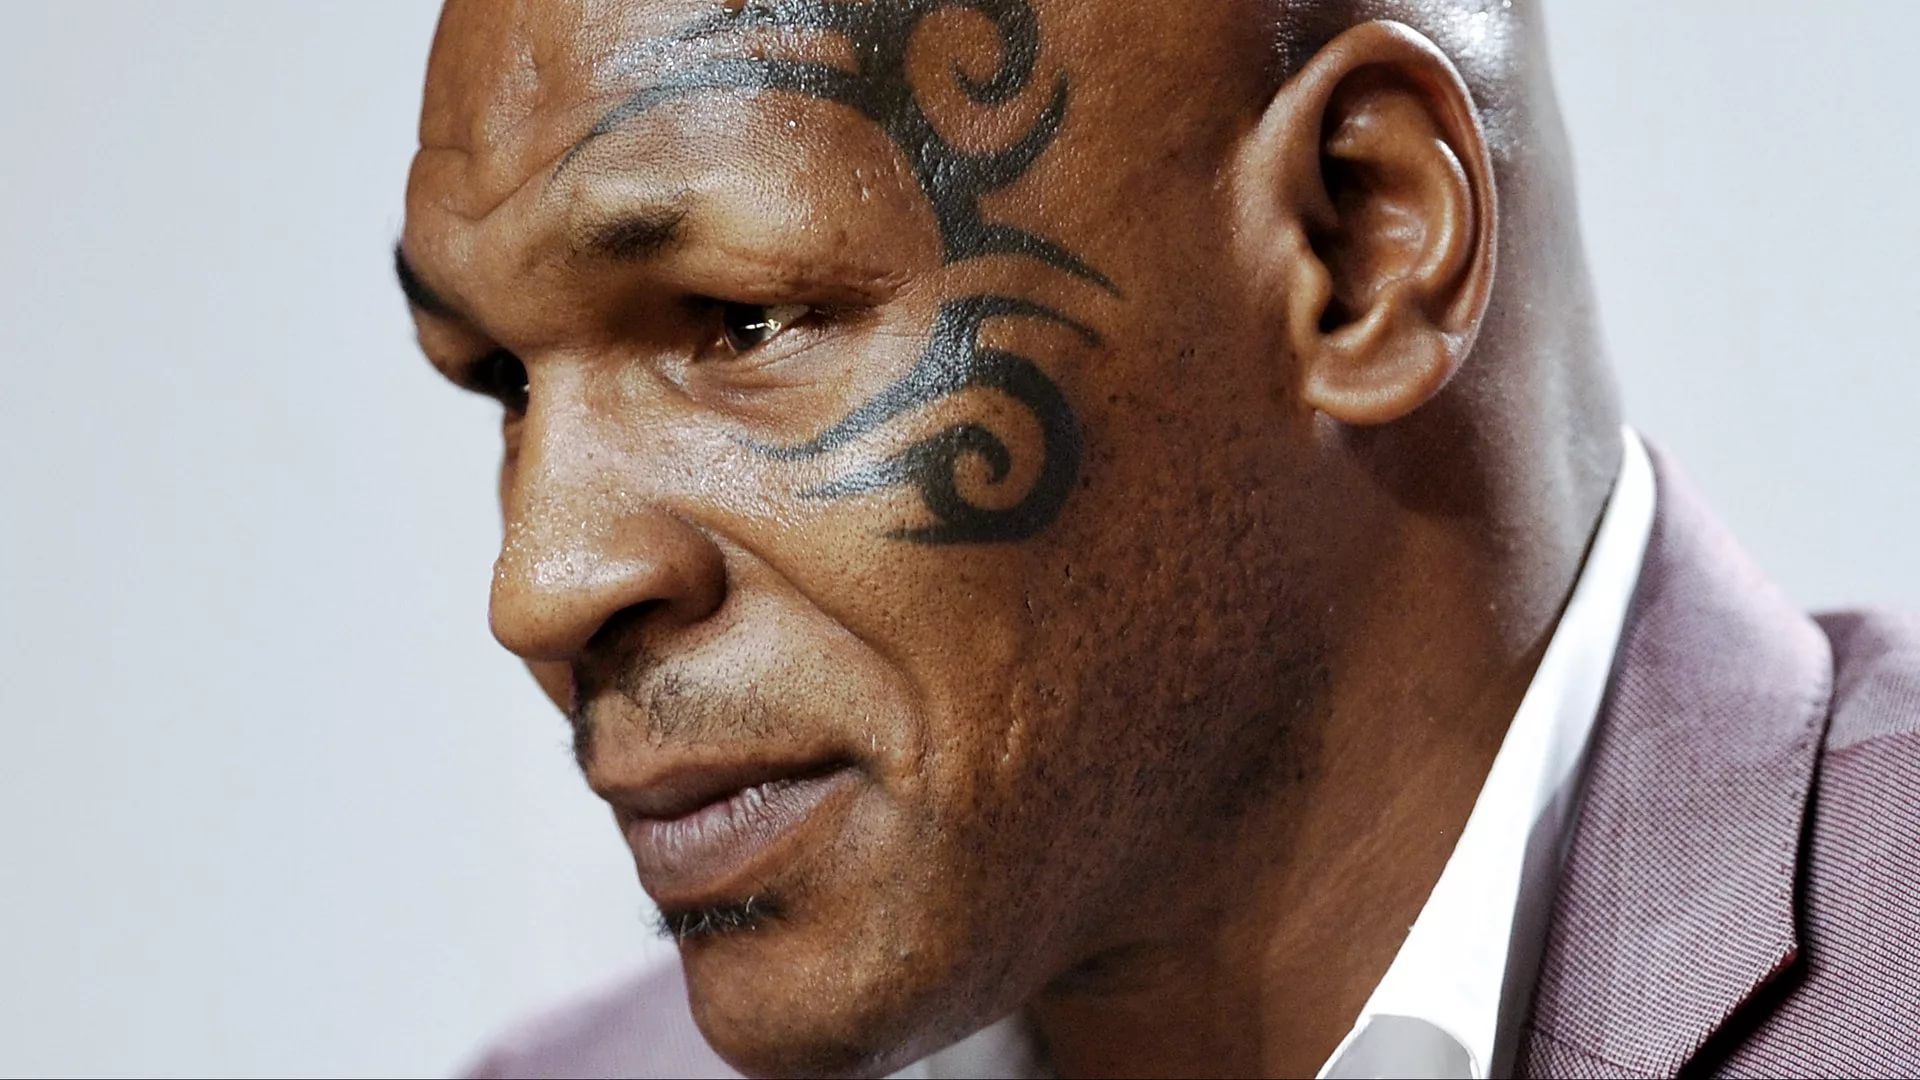 Mike Tyson Wallpapers